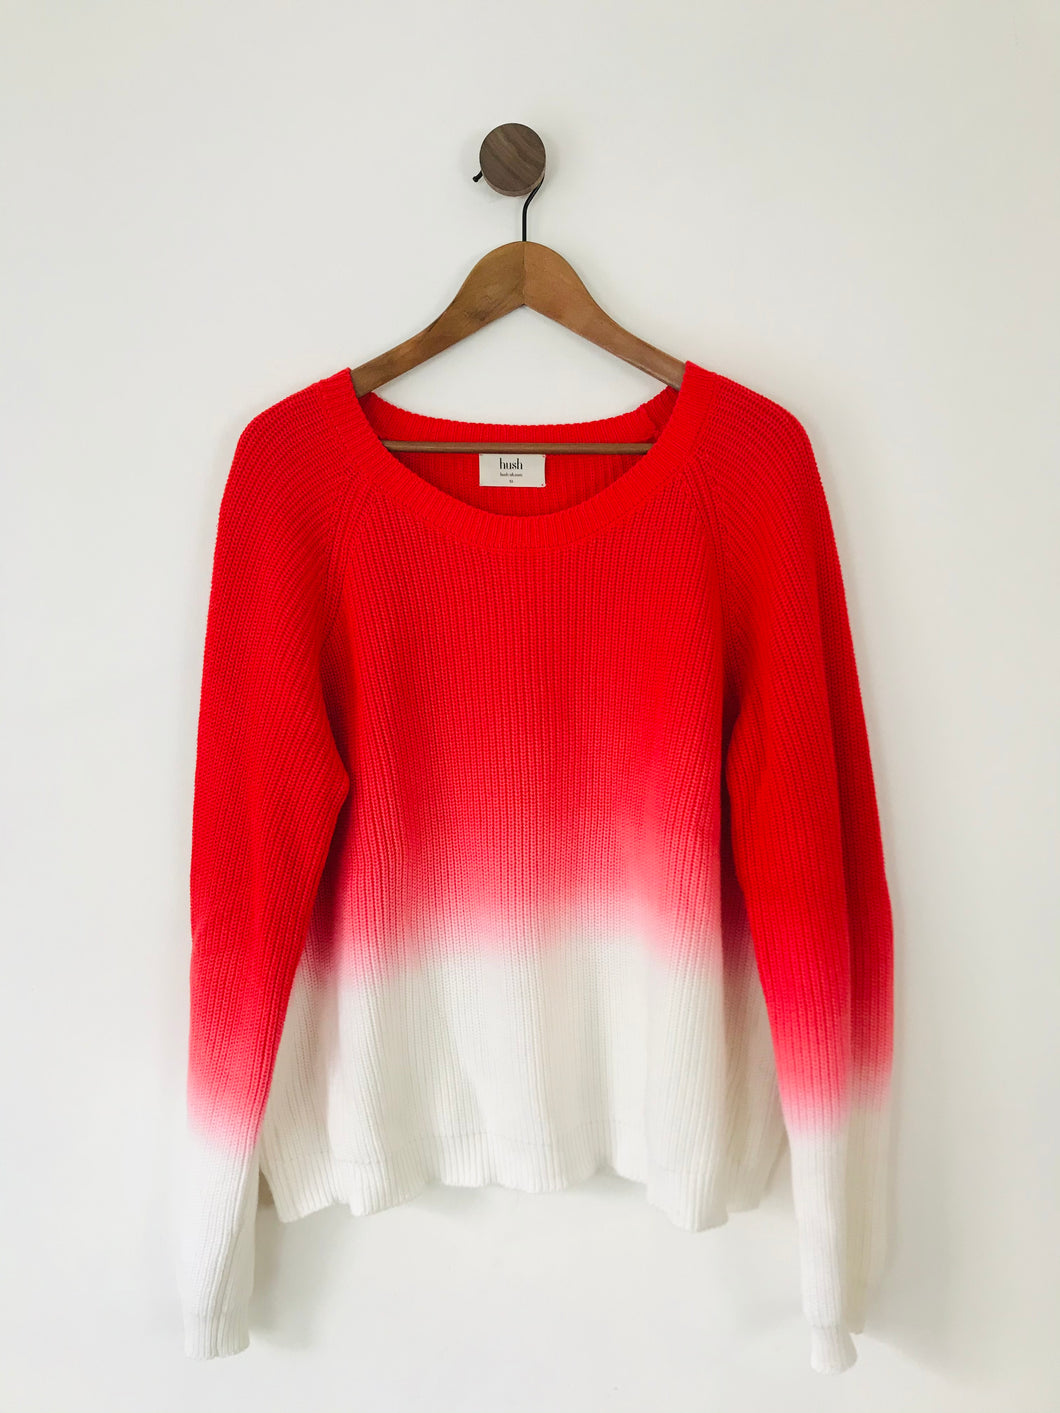 Hush Women’s Ombre Oversized Knit Jumper | XL UK16 | Red Pink